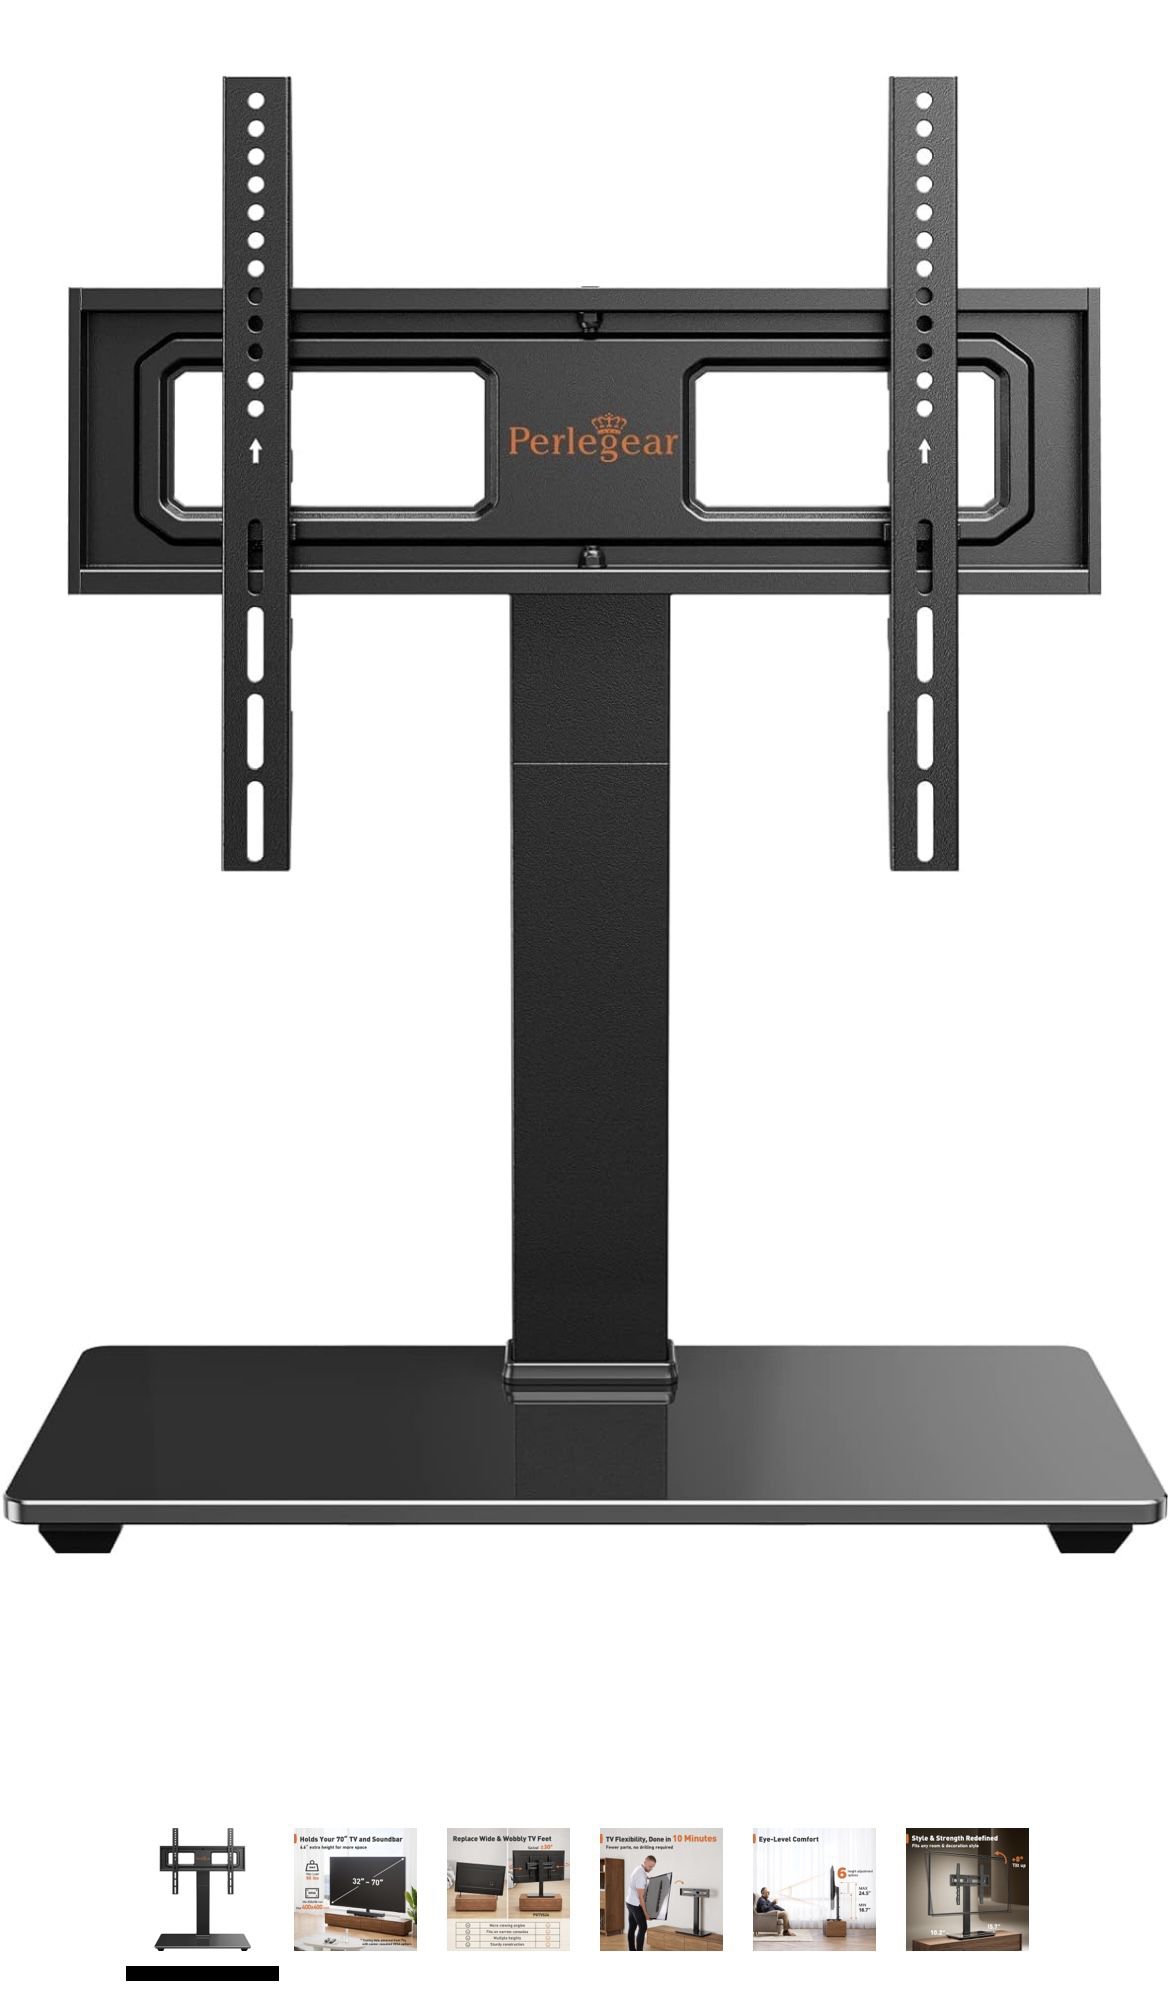 Tv Stand Holds Up To 55” Tv - Stand Only 